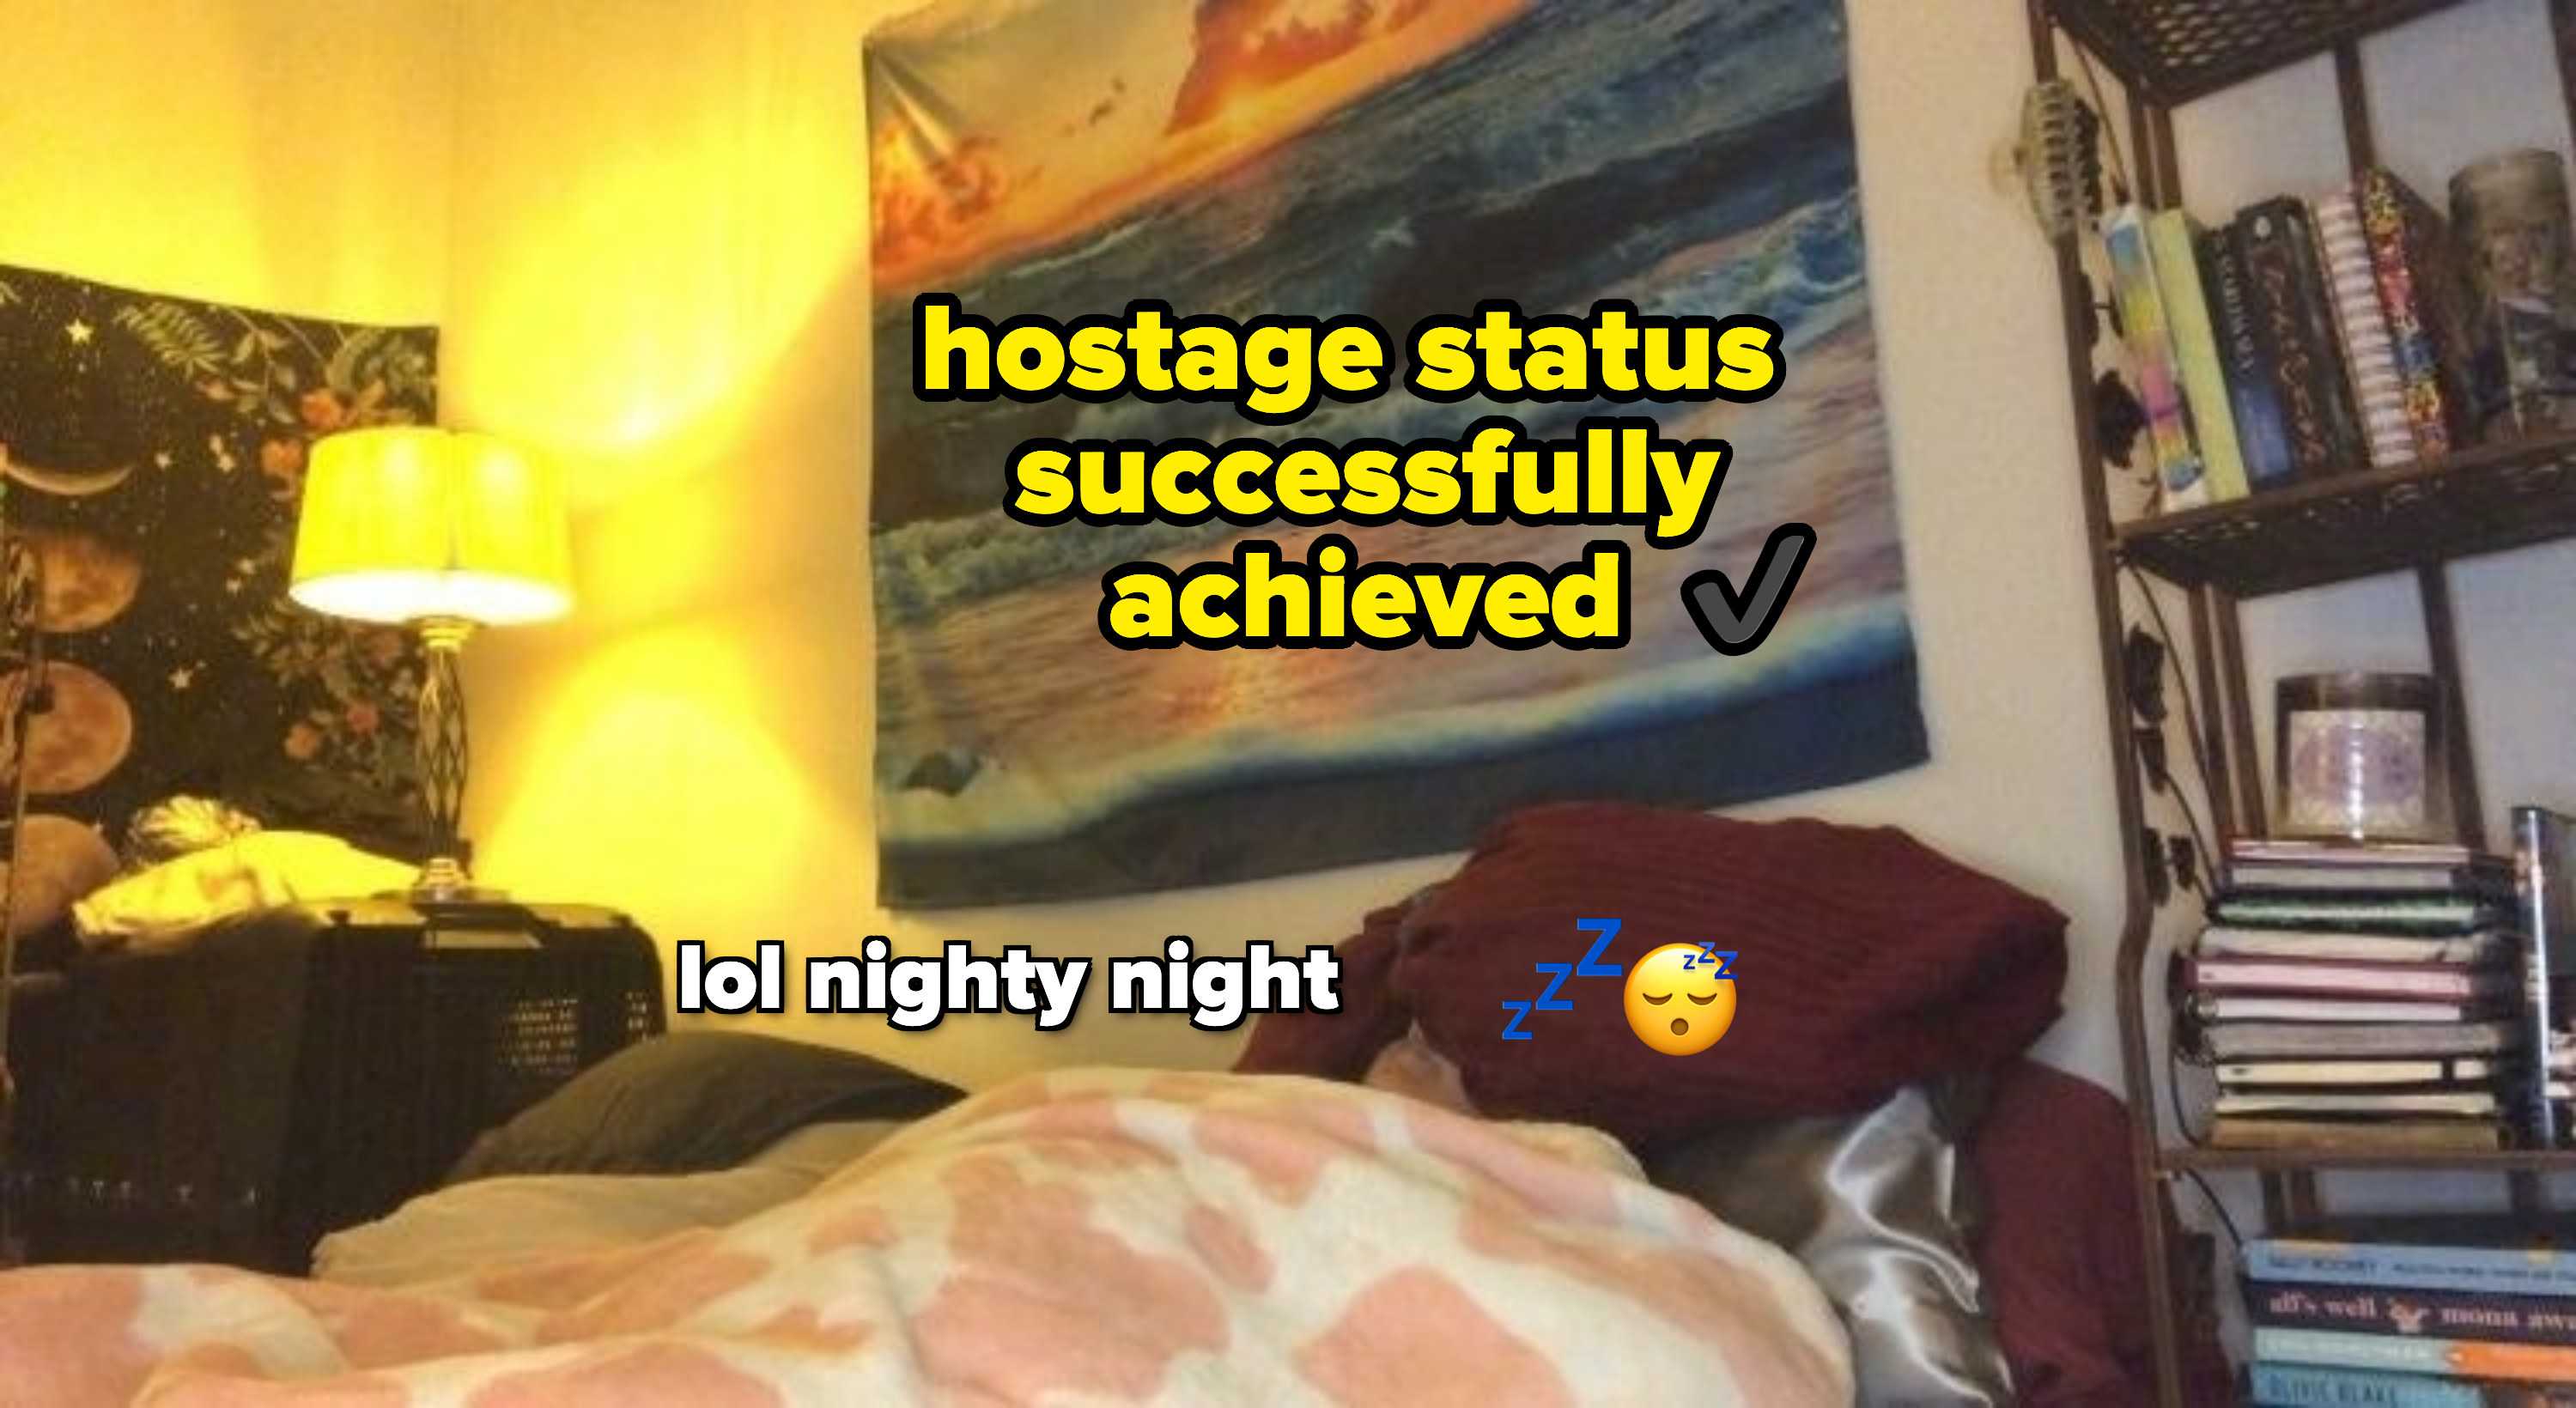 woman sleeping under blanket and pillow with text that says &quot;hostage status successfully achieved&quot; and &quot;lol nighty night&quot;